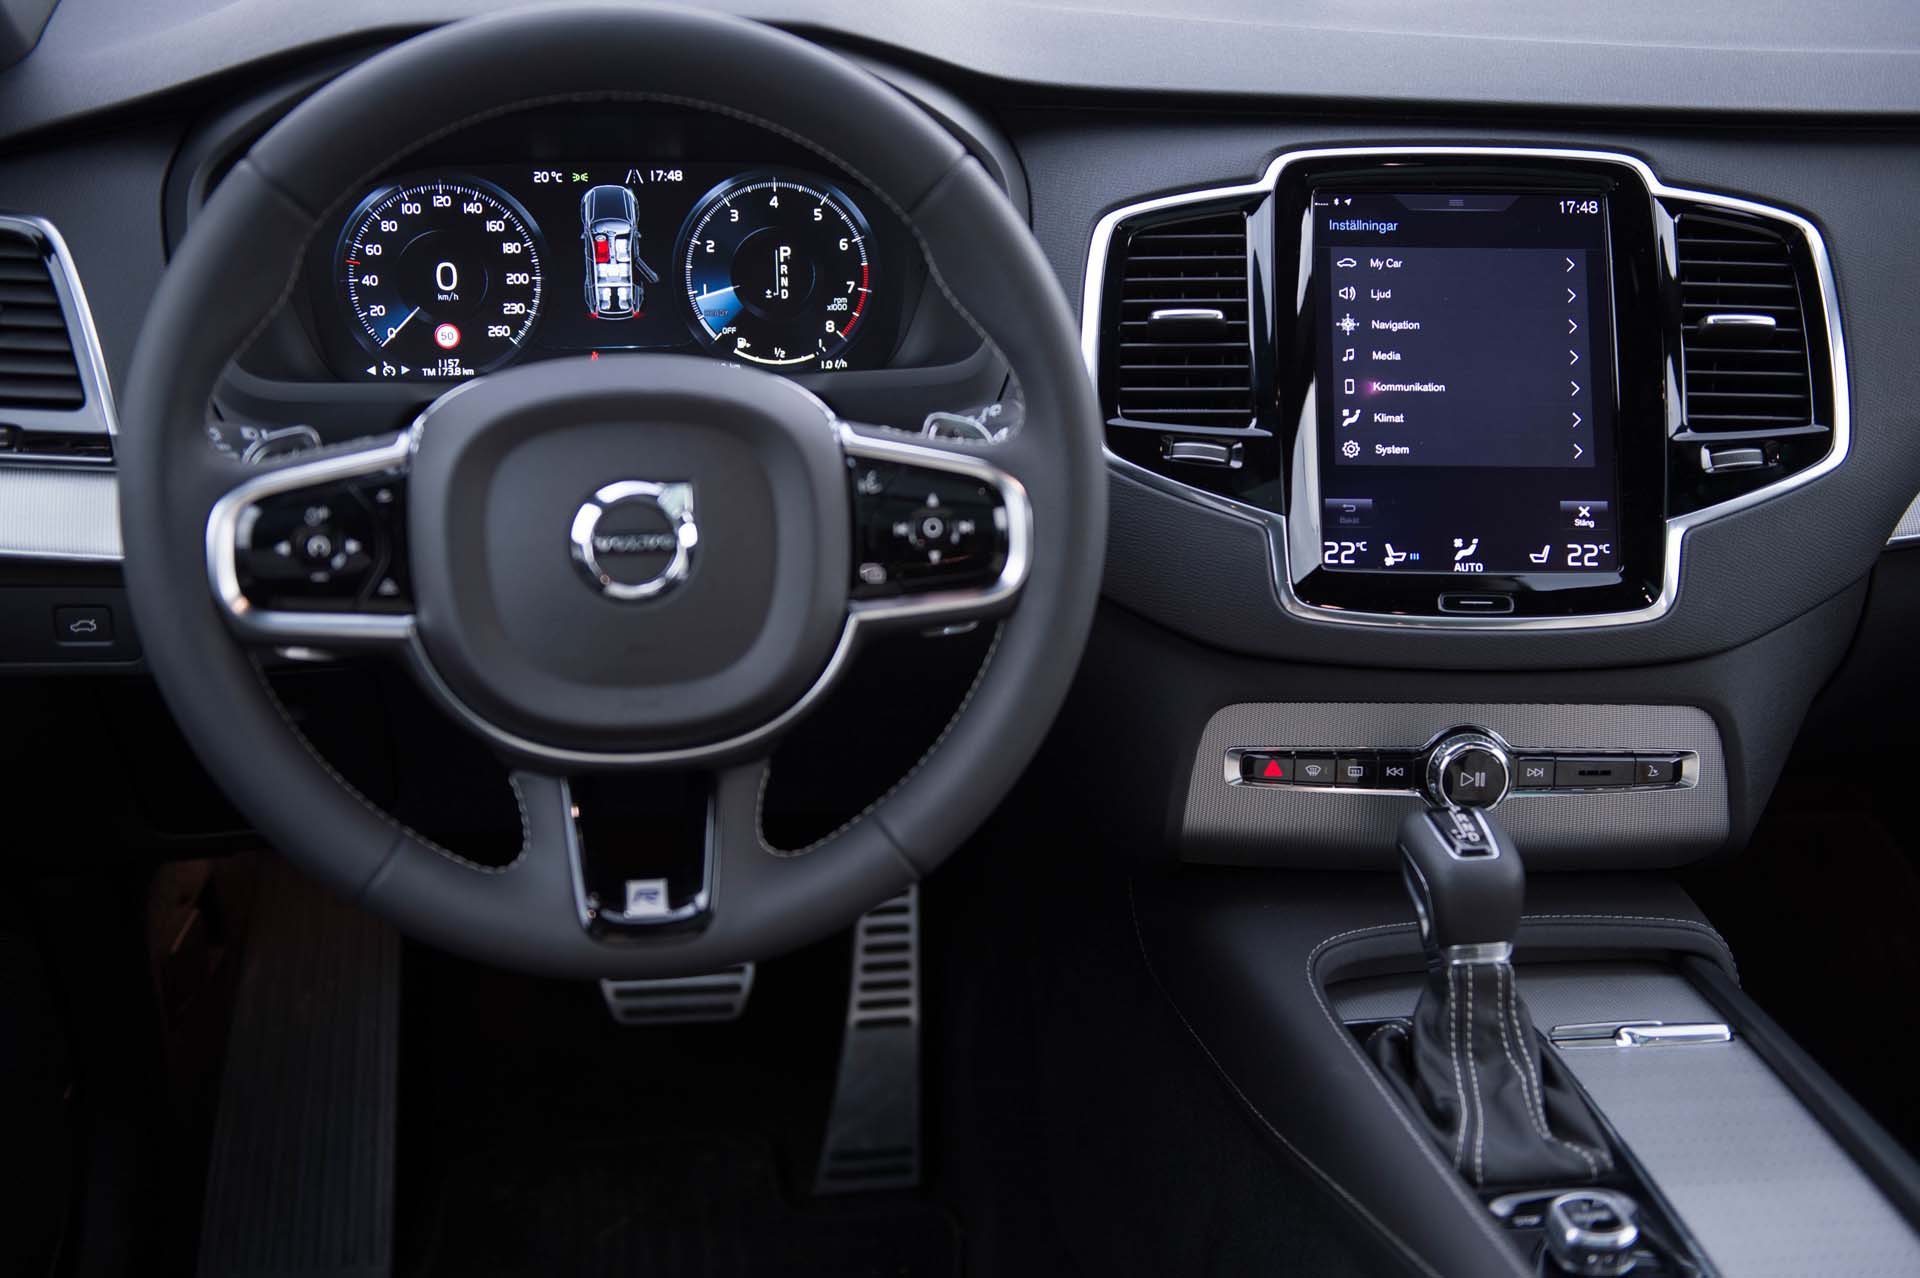 Volvo issues recall for GPS-equipped models over lack of location